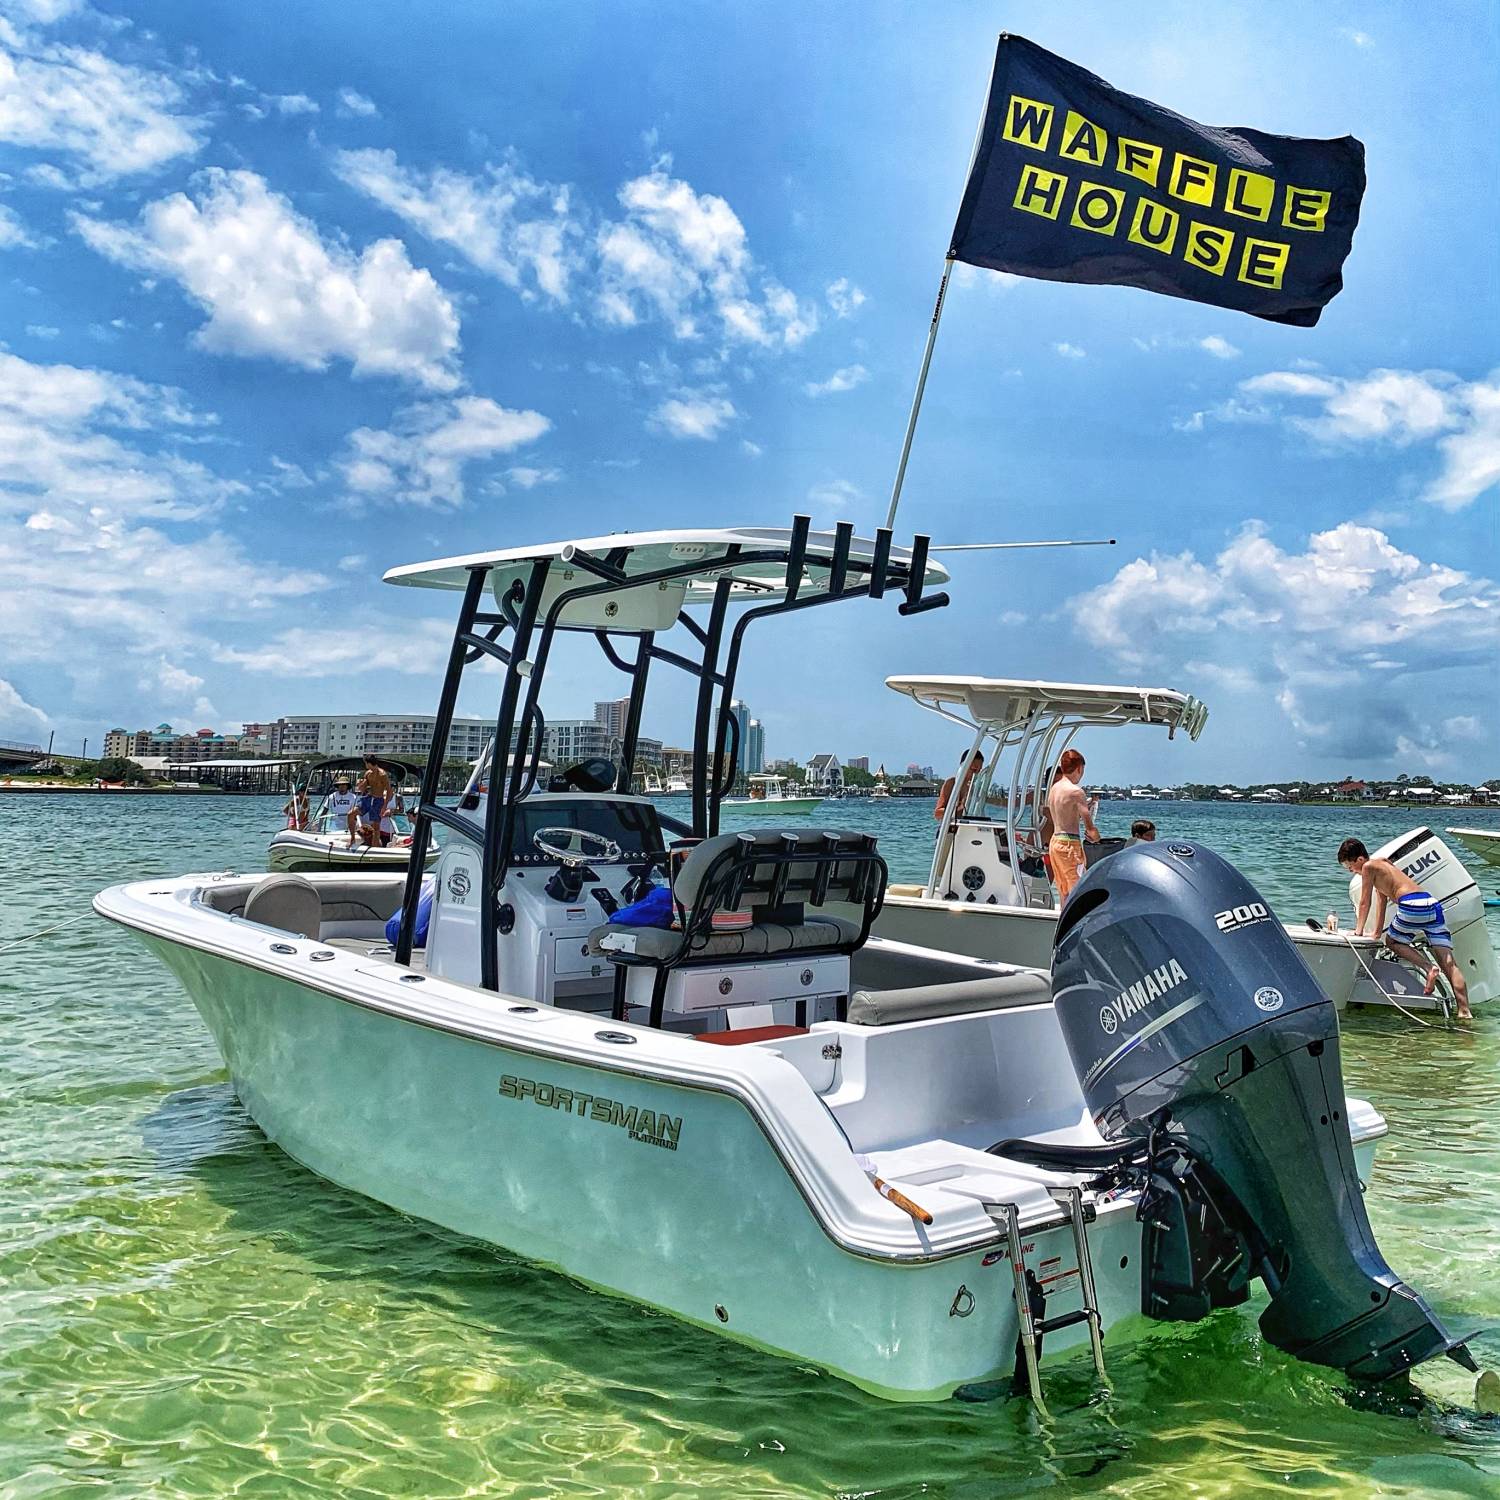 Title: A sunny day in OBA - On board their Sportsman Open 212 Center Console - Location: Robinson Island, Orange Beach, Alabama. Participating in the Photo Contest #SportsmanFebruary2022